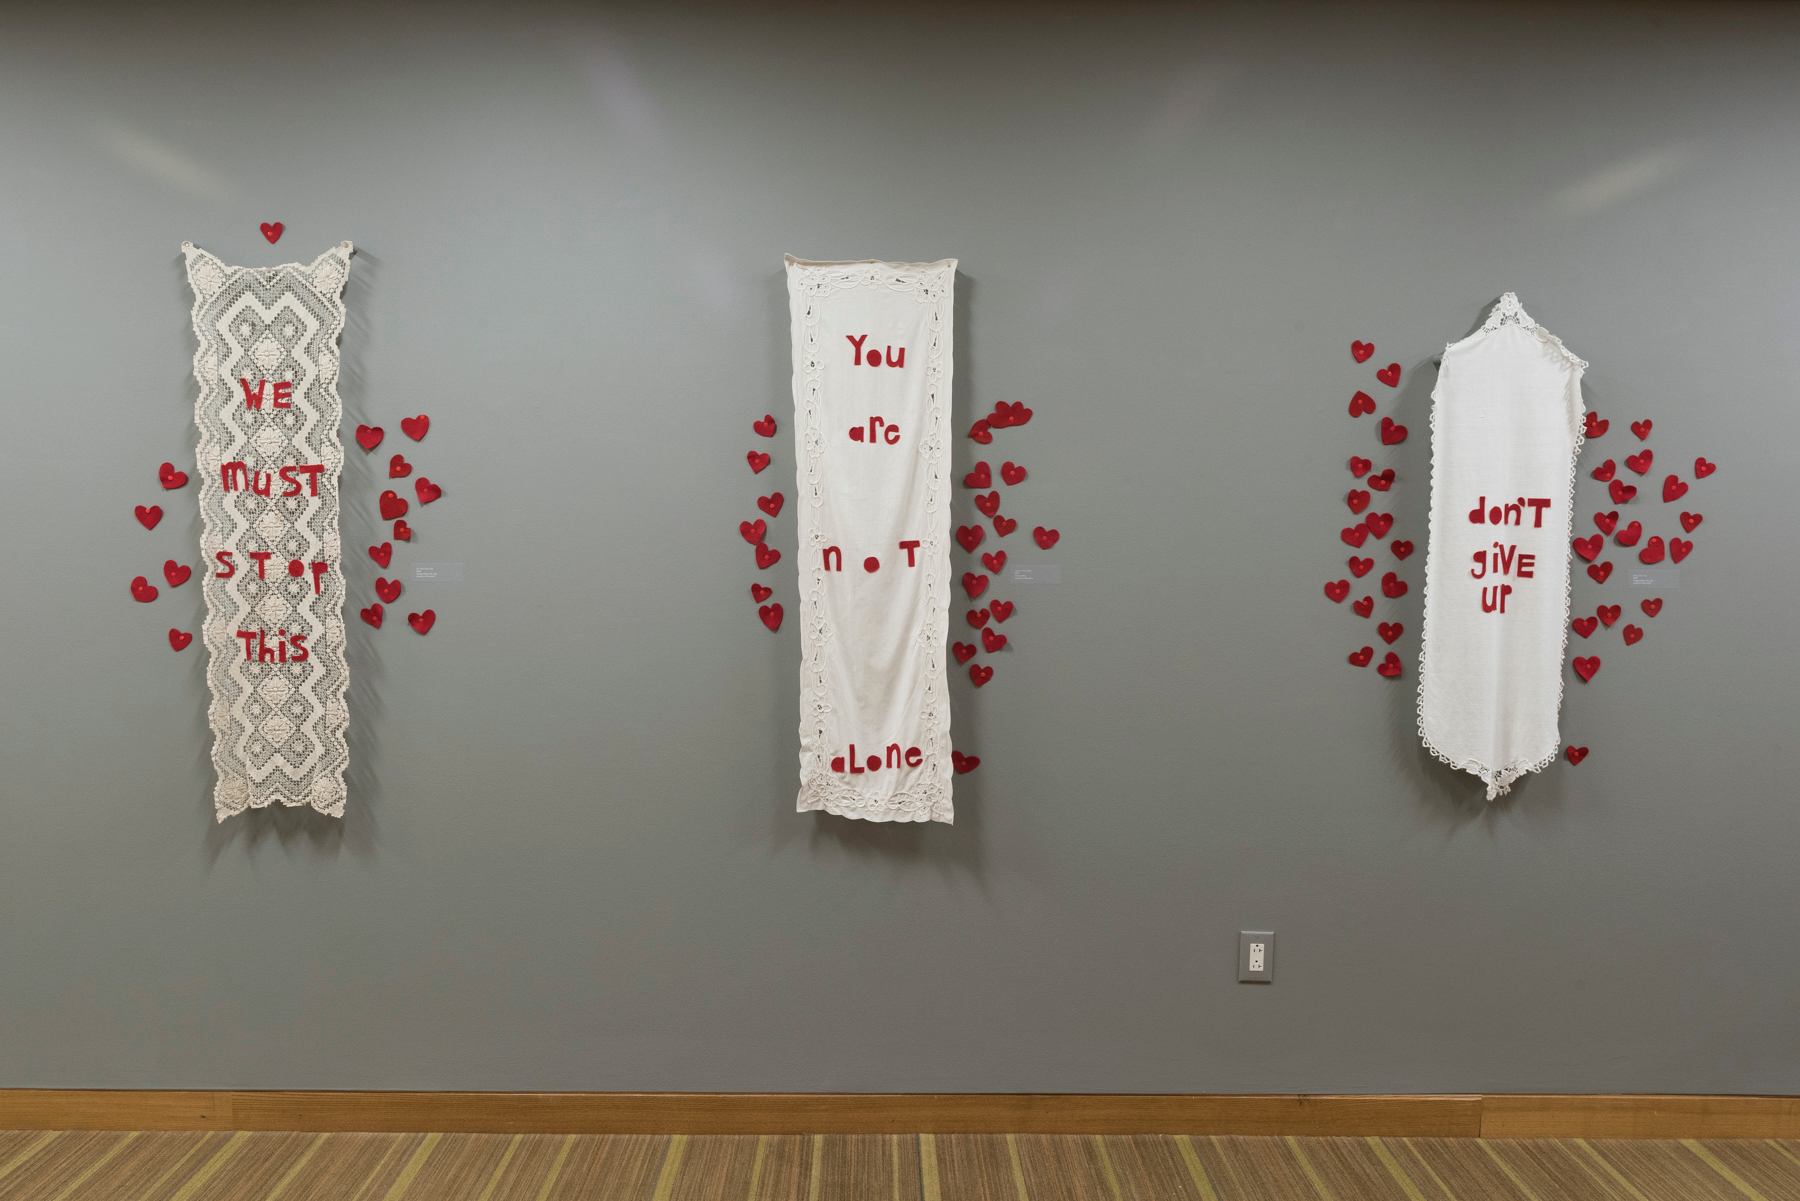 installation view from Carole Loeffler: Make What You Need